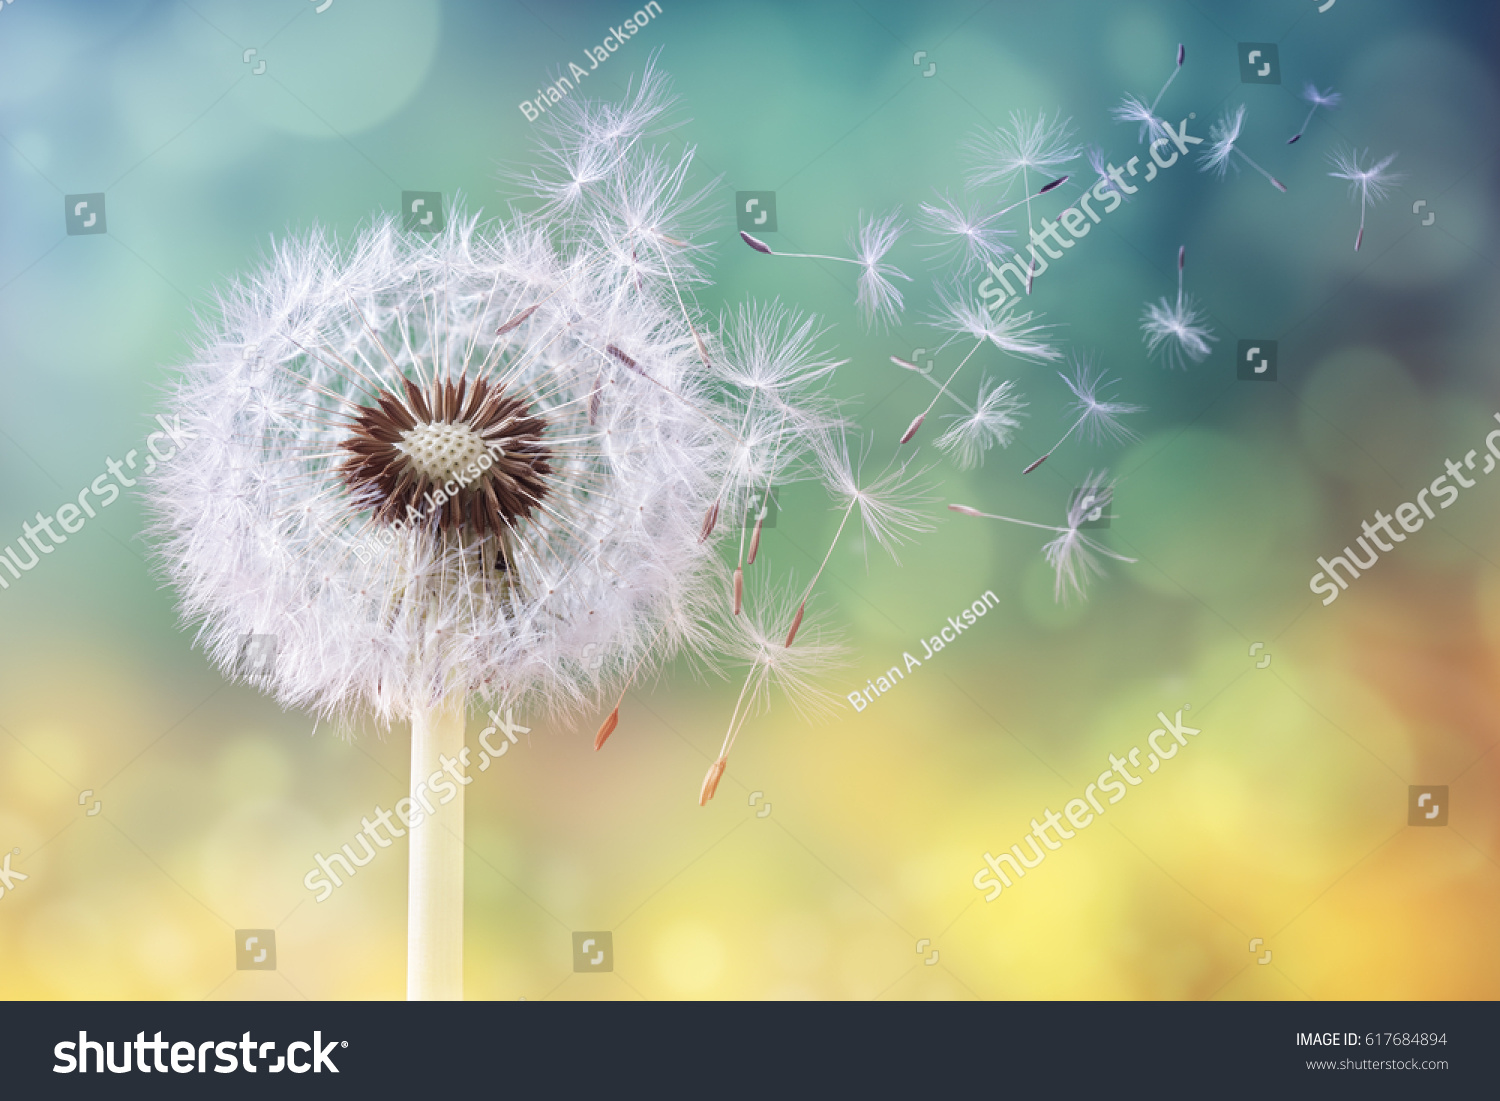 Dandelion seeds in the sunlight blowing away across a fresh green morning background #617684894